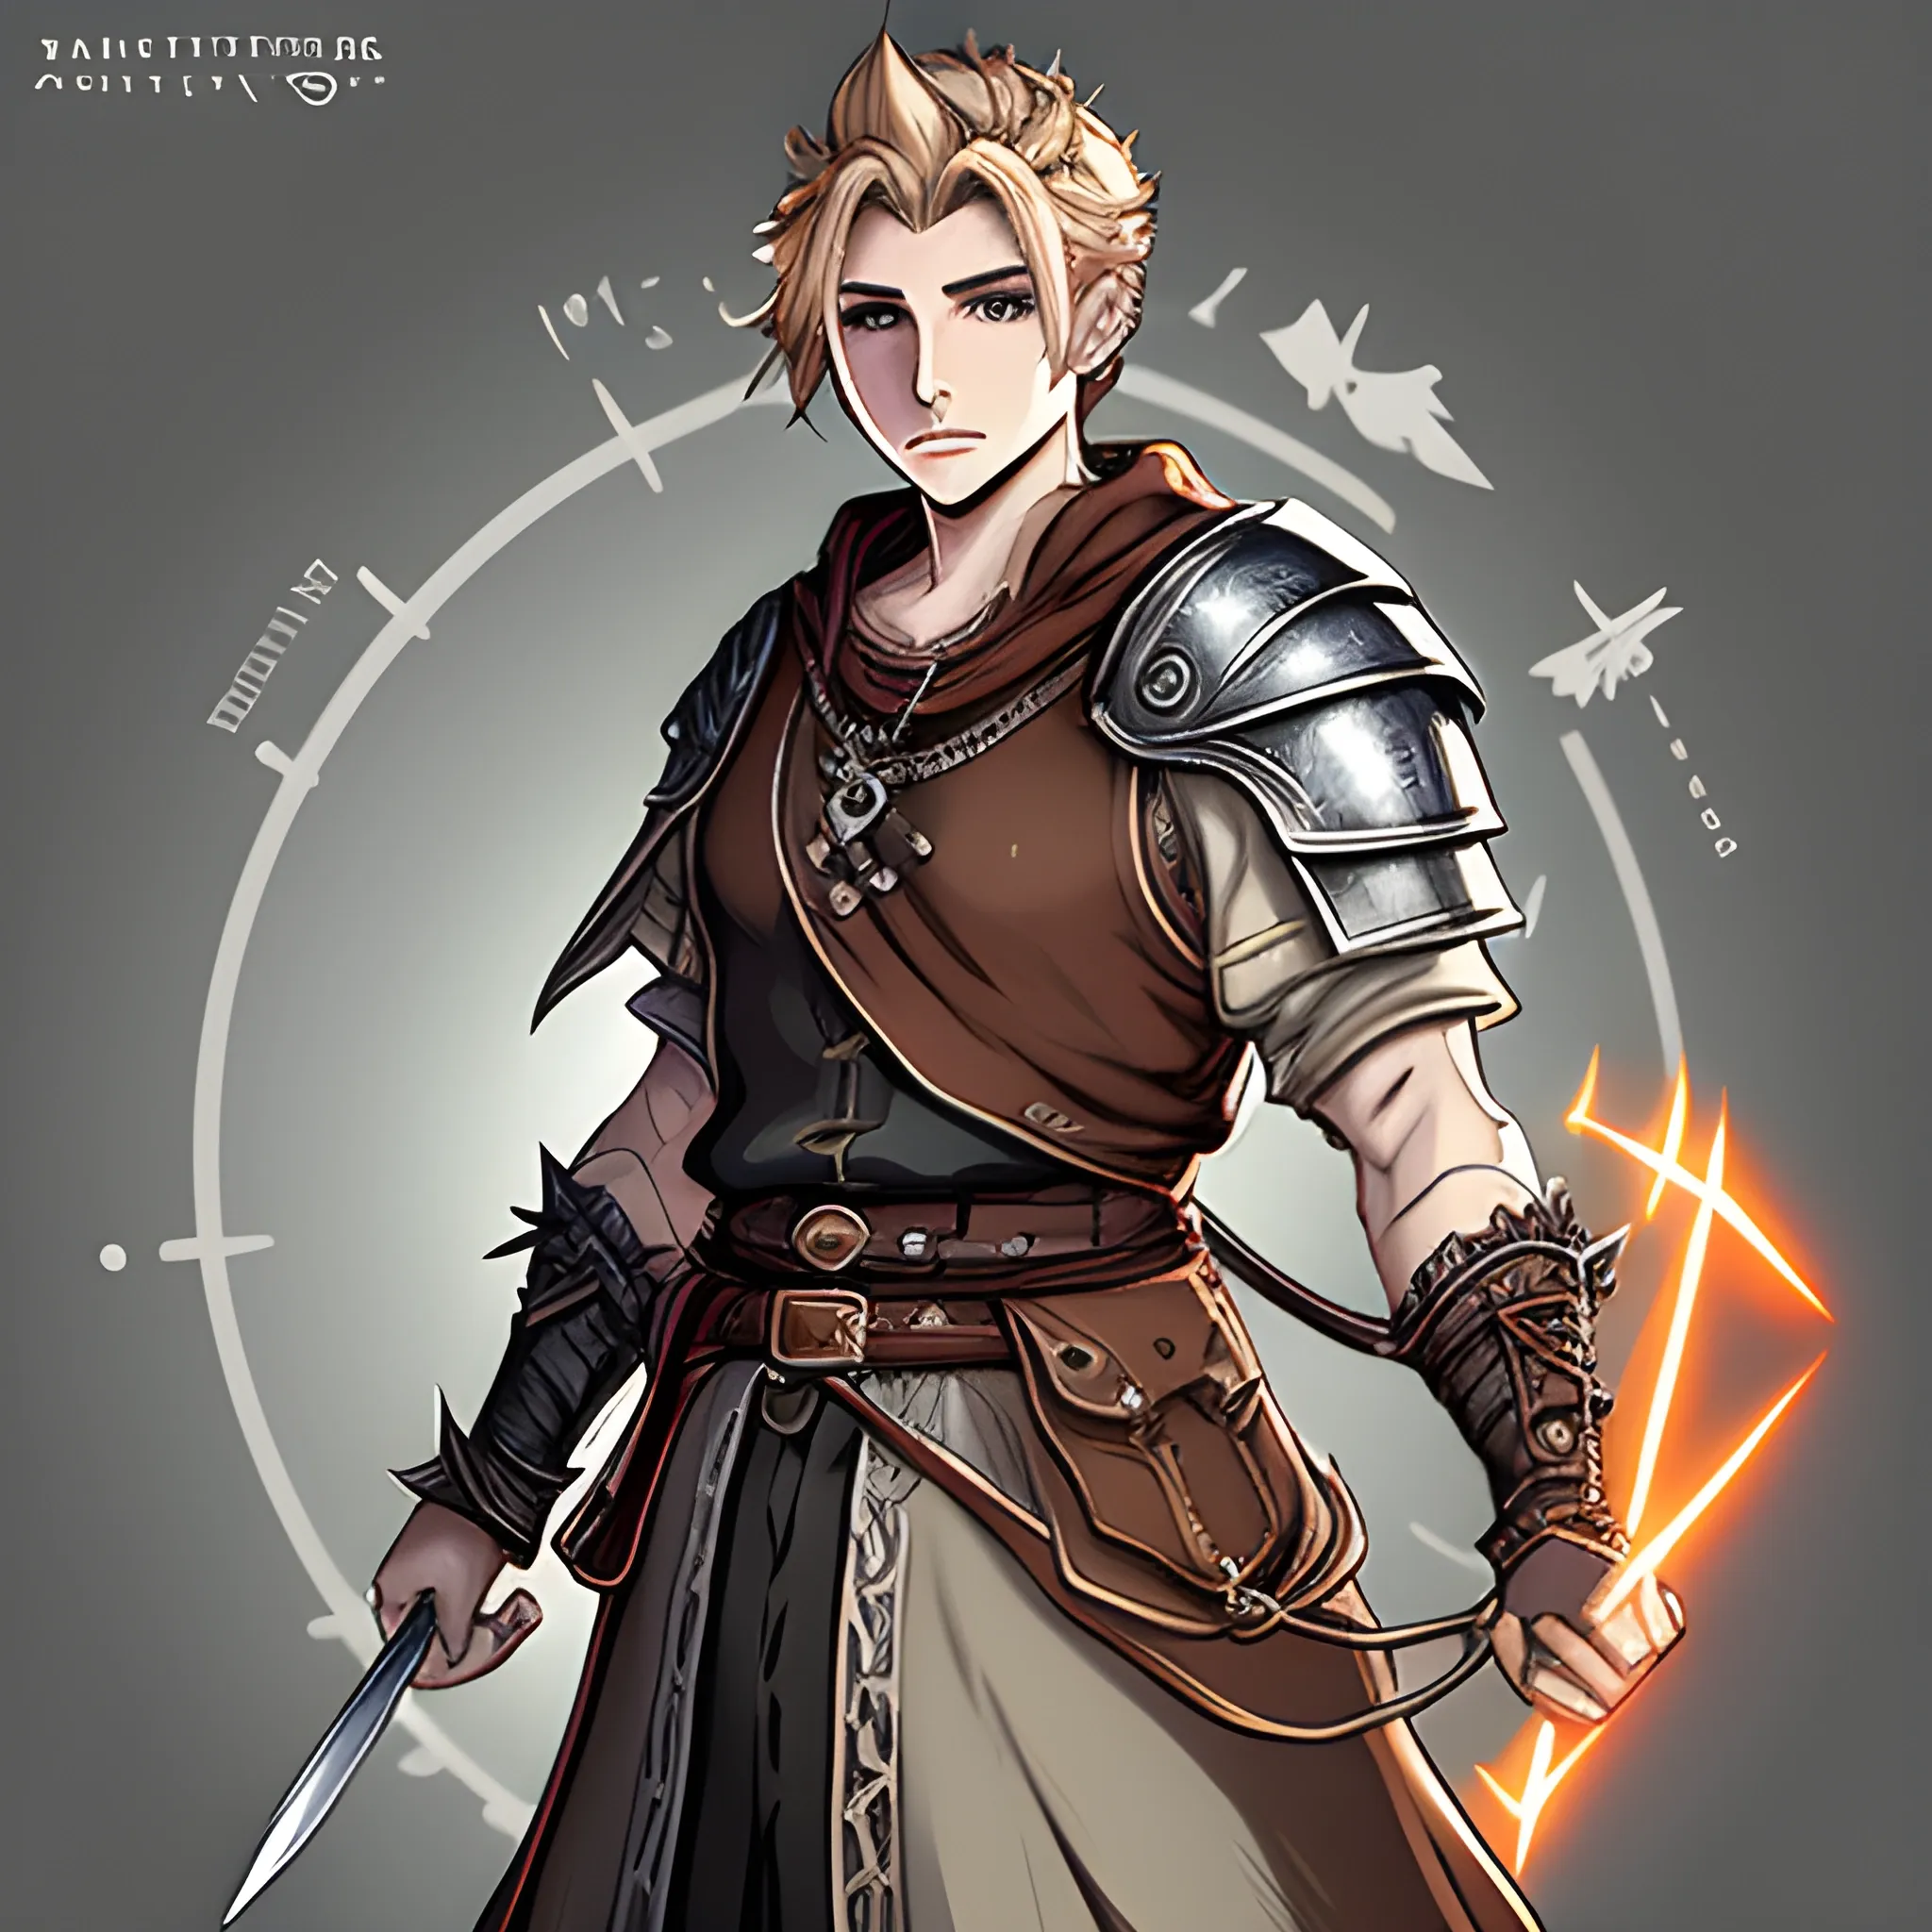 {{{octopath traveler style rpg character art of powerful fantasy warrior}}}, highly detailed, {hyperrealistic waist up portrait of 20 year old Cullen Rutherford from Dragon Age with simple background oil colors}, overflowing energy, wearing long medieval dress, wearing medieval armor, wearing silver necklace, illustrated, short blonde hair, sharp focus, elegant, volumetric lighting, smooth, in style of octopath traveller videogame, thick black outlines, cartoony, anime, art by artgerm, art station, character art